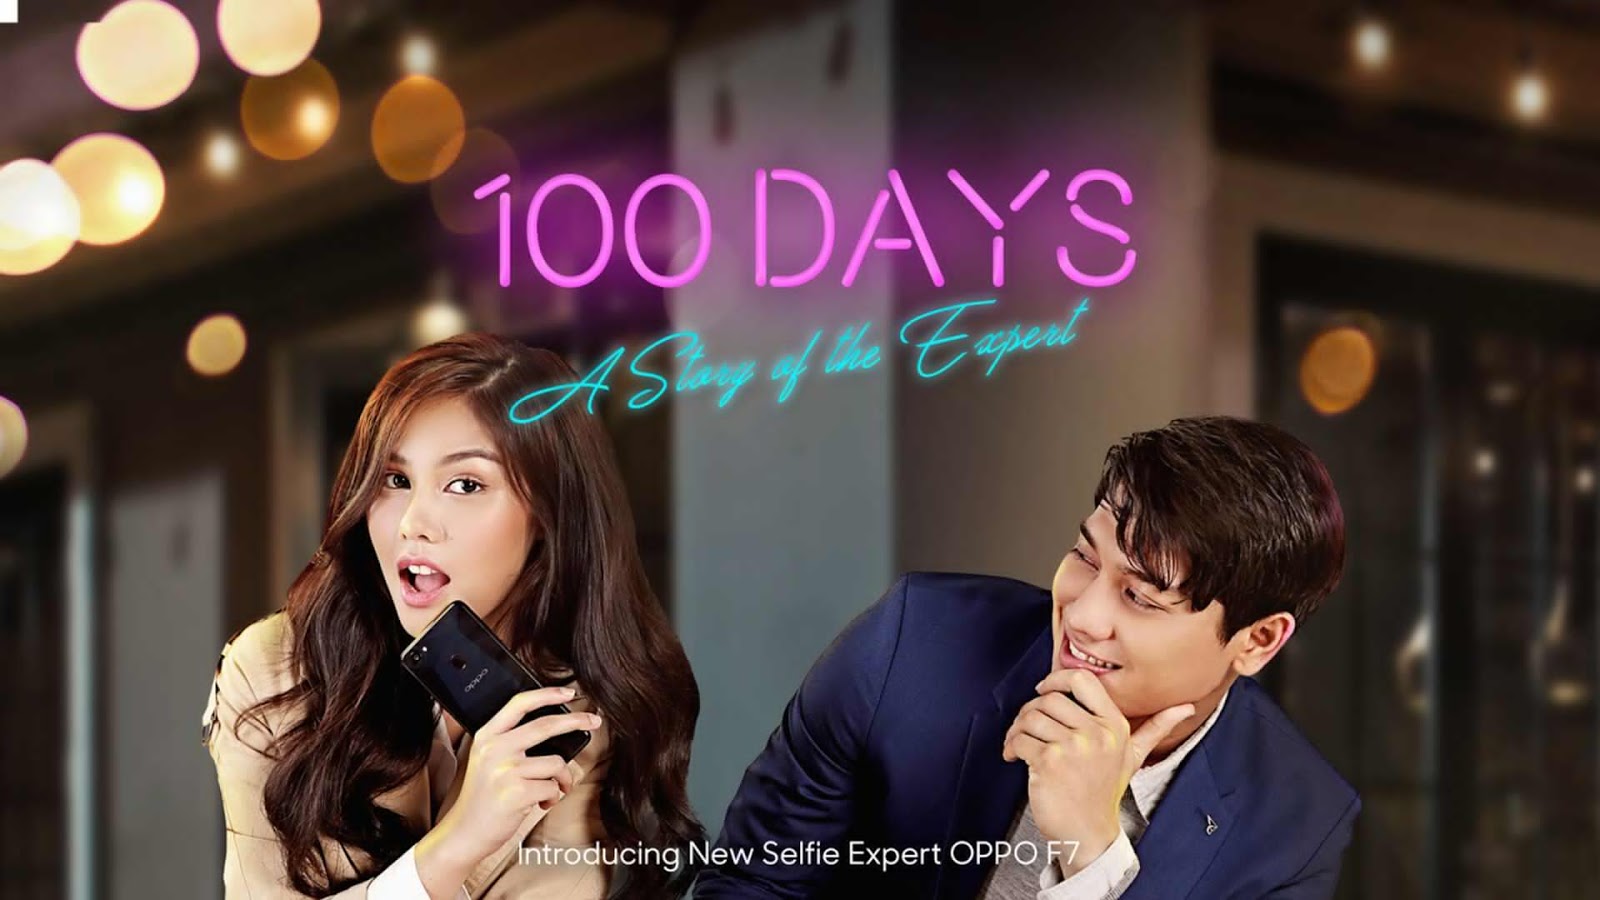 Web Series OPPO F7 "100 Days: A Story of the Expert" Kisah 